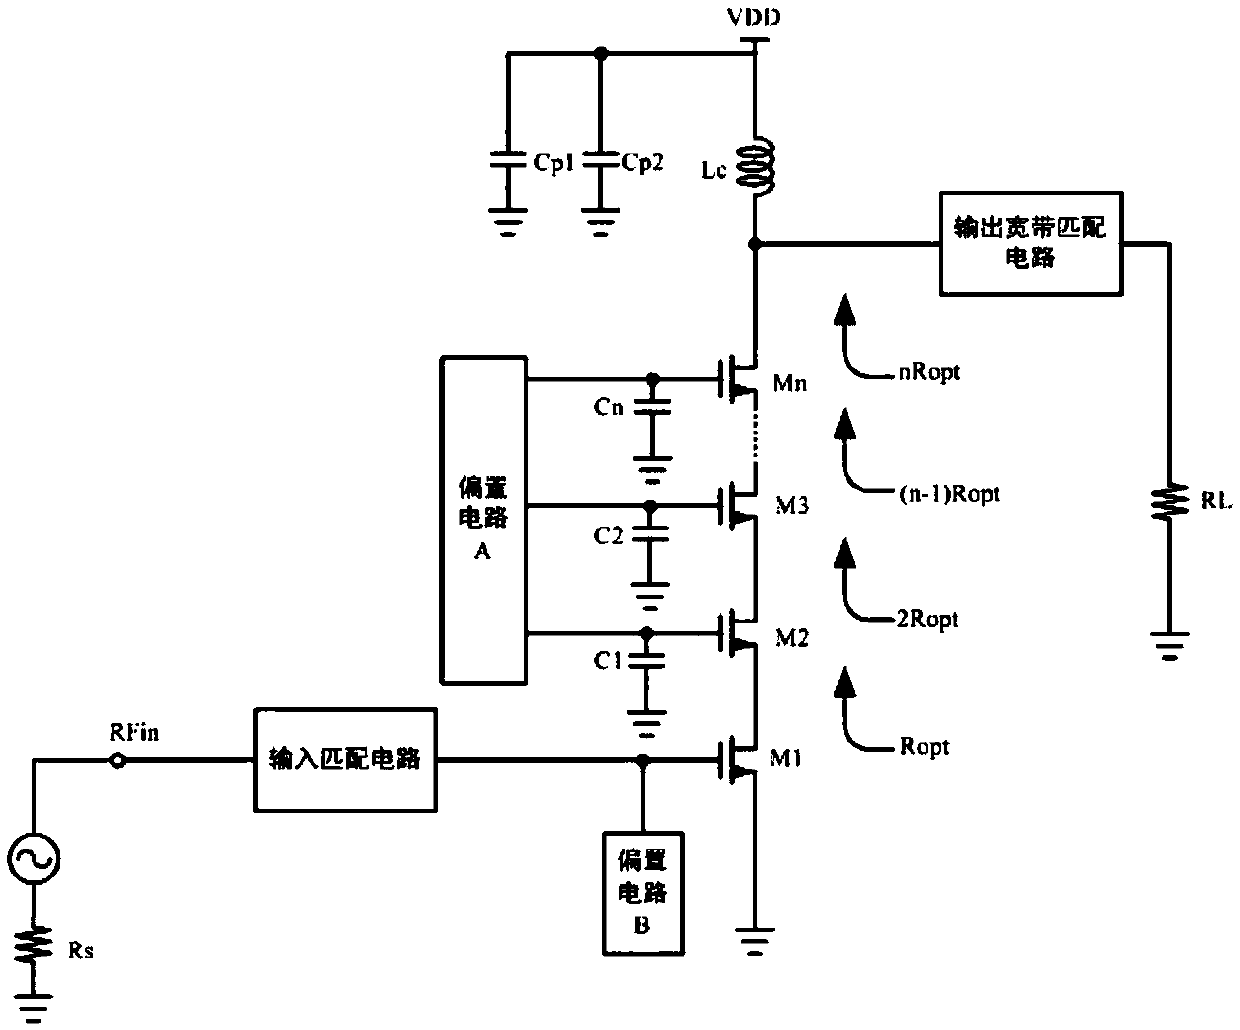 Radio-frequency power amplifier with stack structure